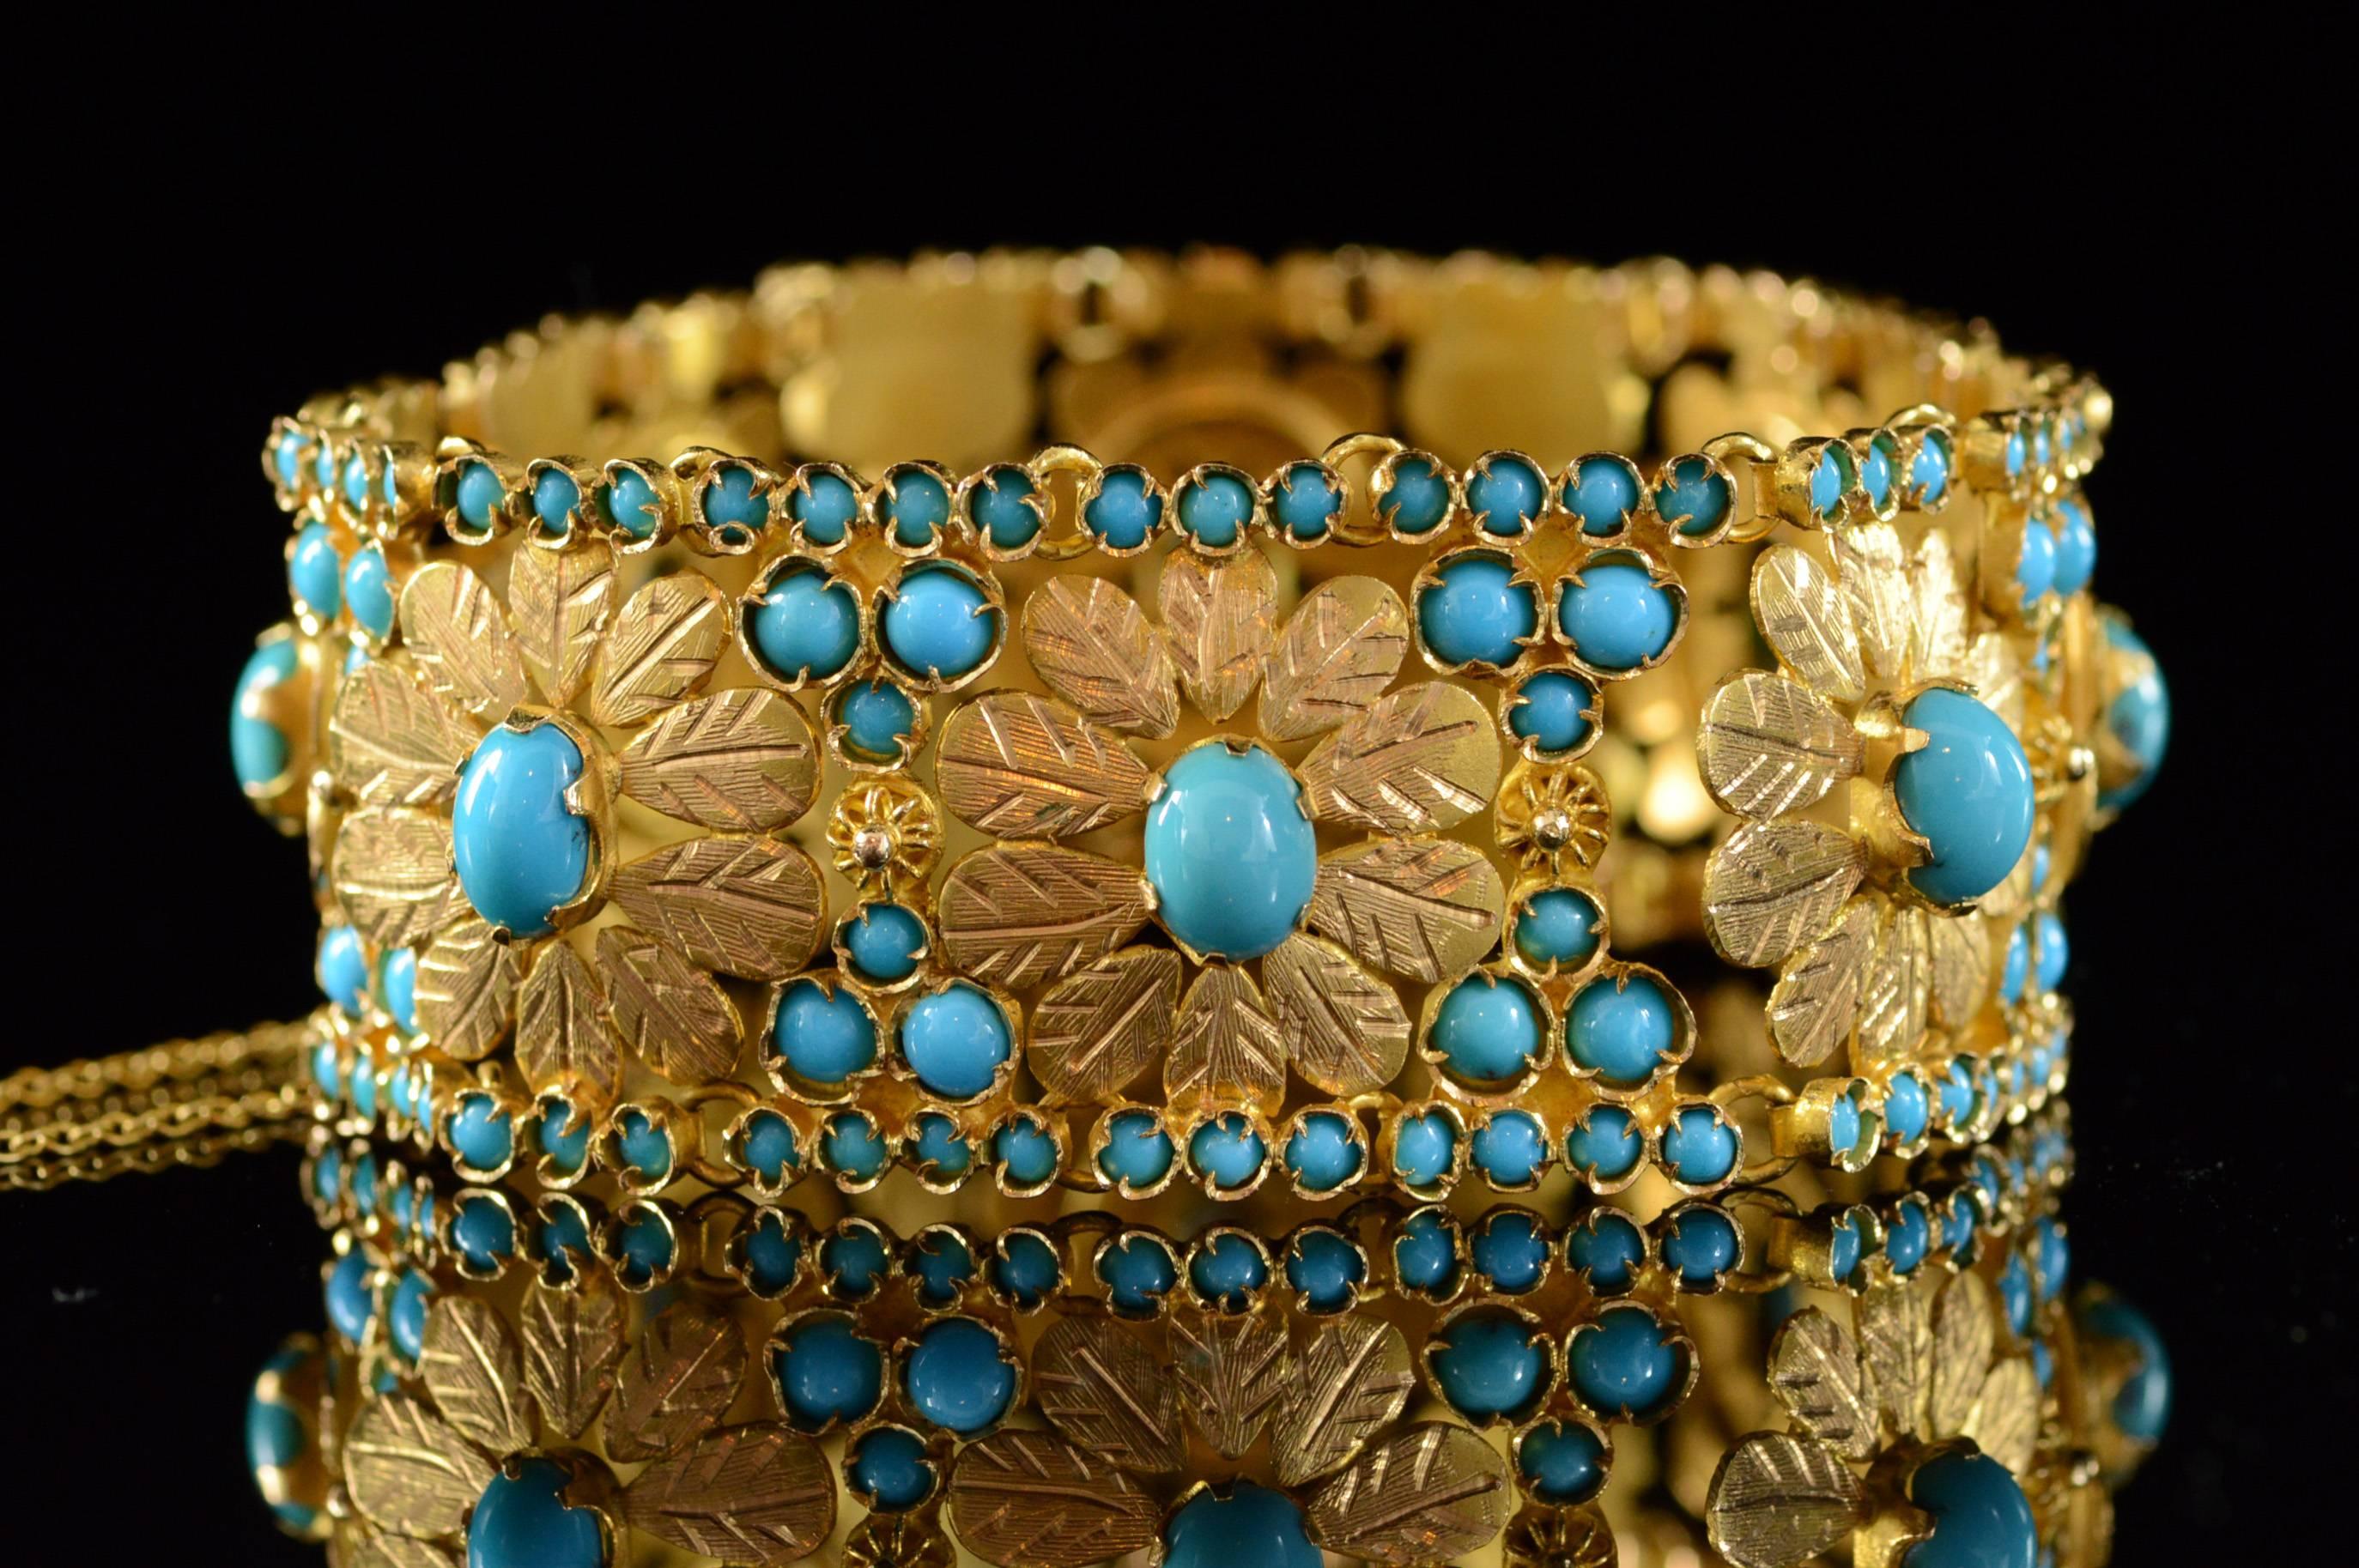 All diamonds are graded according to GIA grading standards.

·Item: 18K Stunning Persian Turquoise Encrusted Flower Link Bracelet 7.5